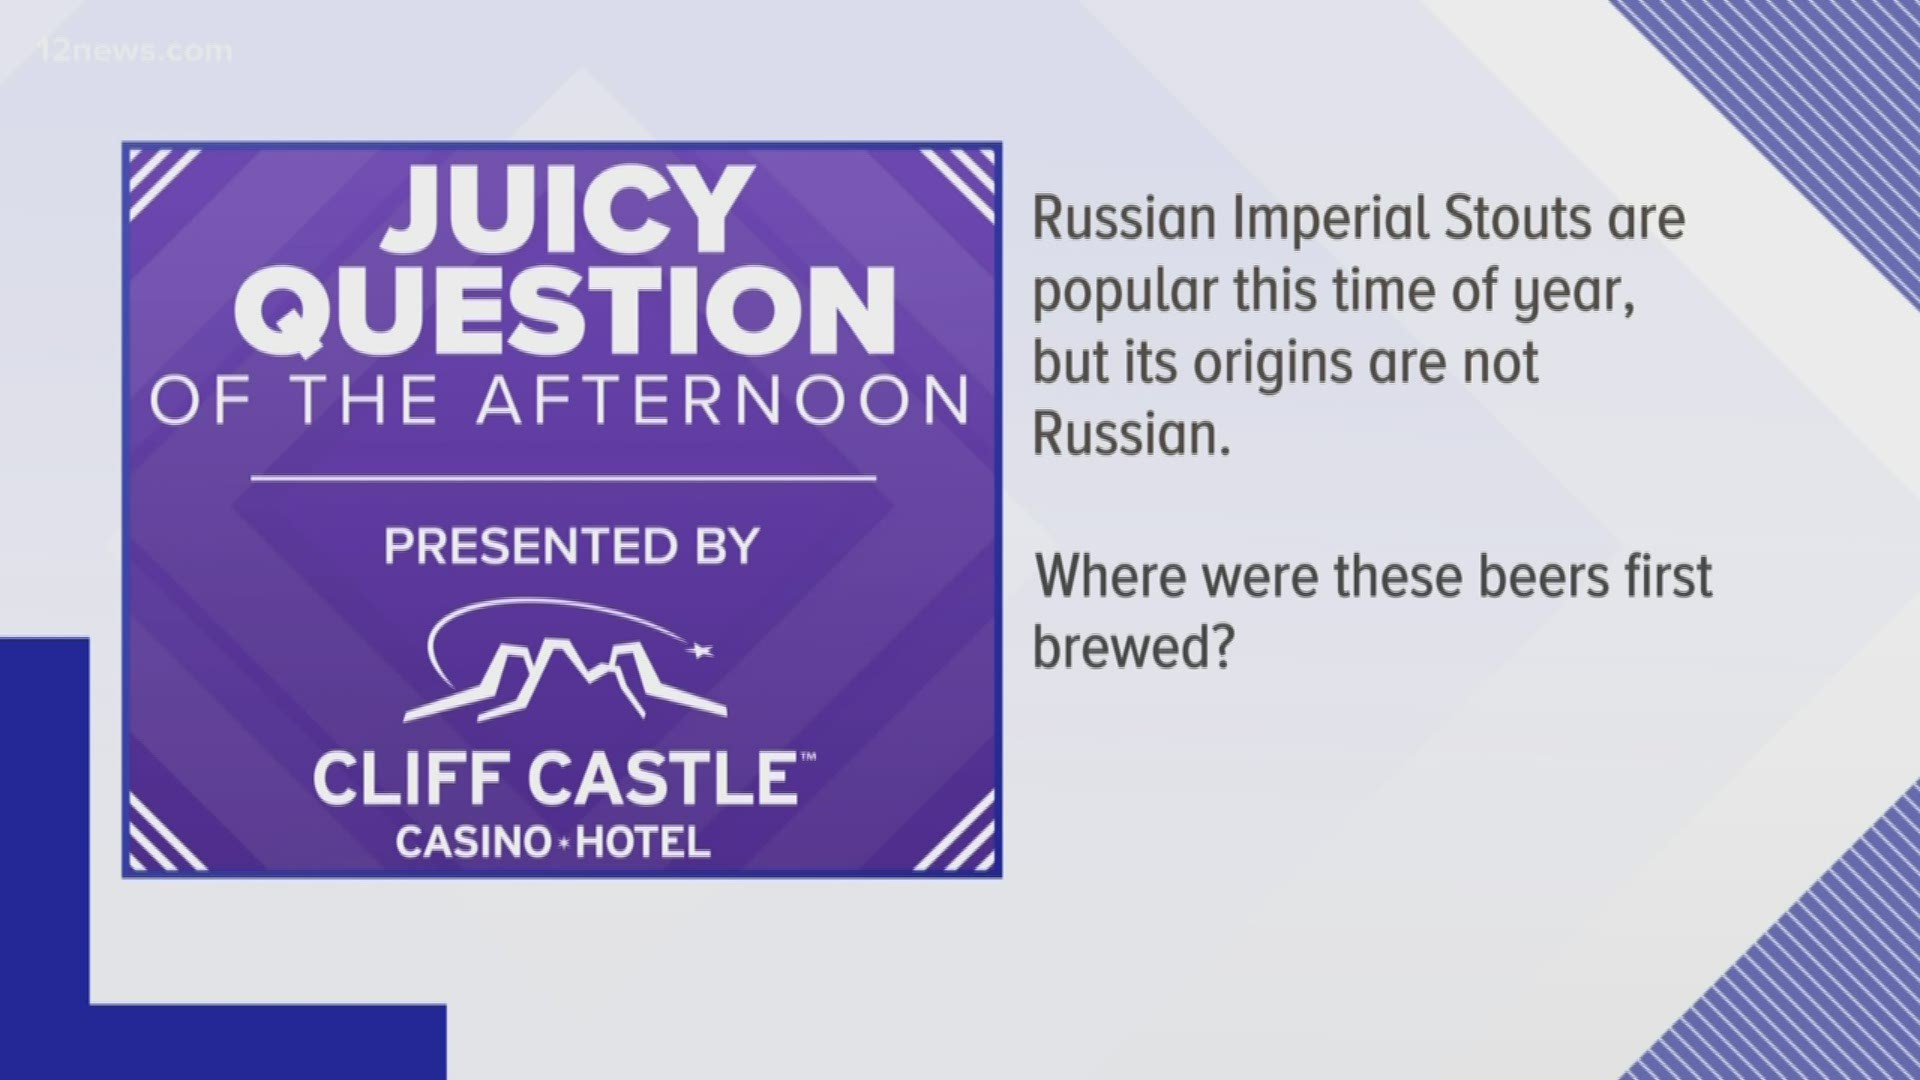 Russian Imperial Stouts are popular this time of year, but its origins are not Russian.  Where were these beers first brewed?